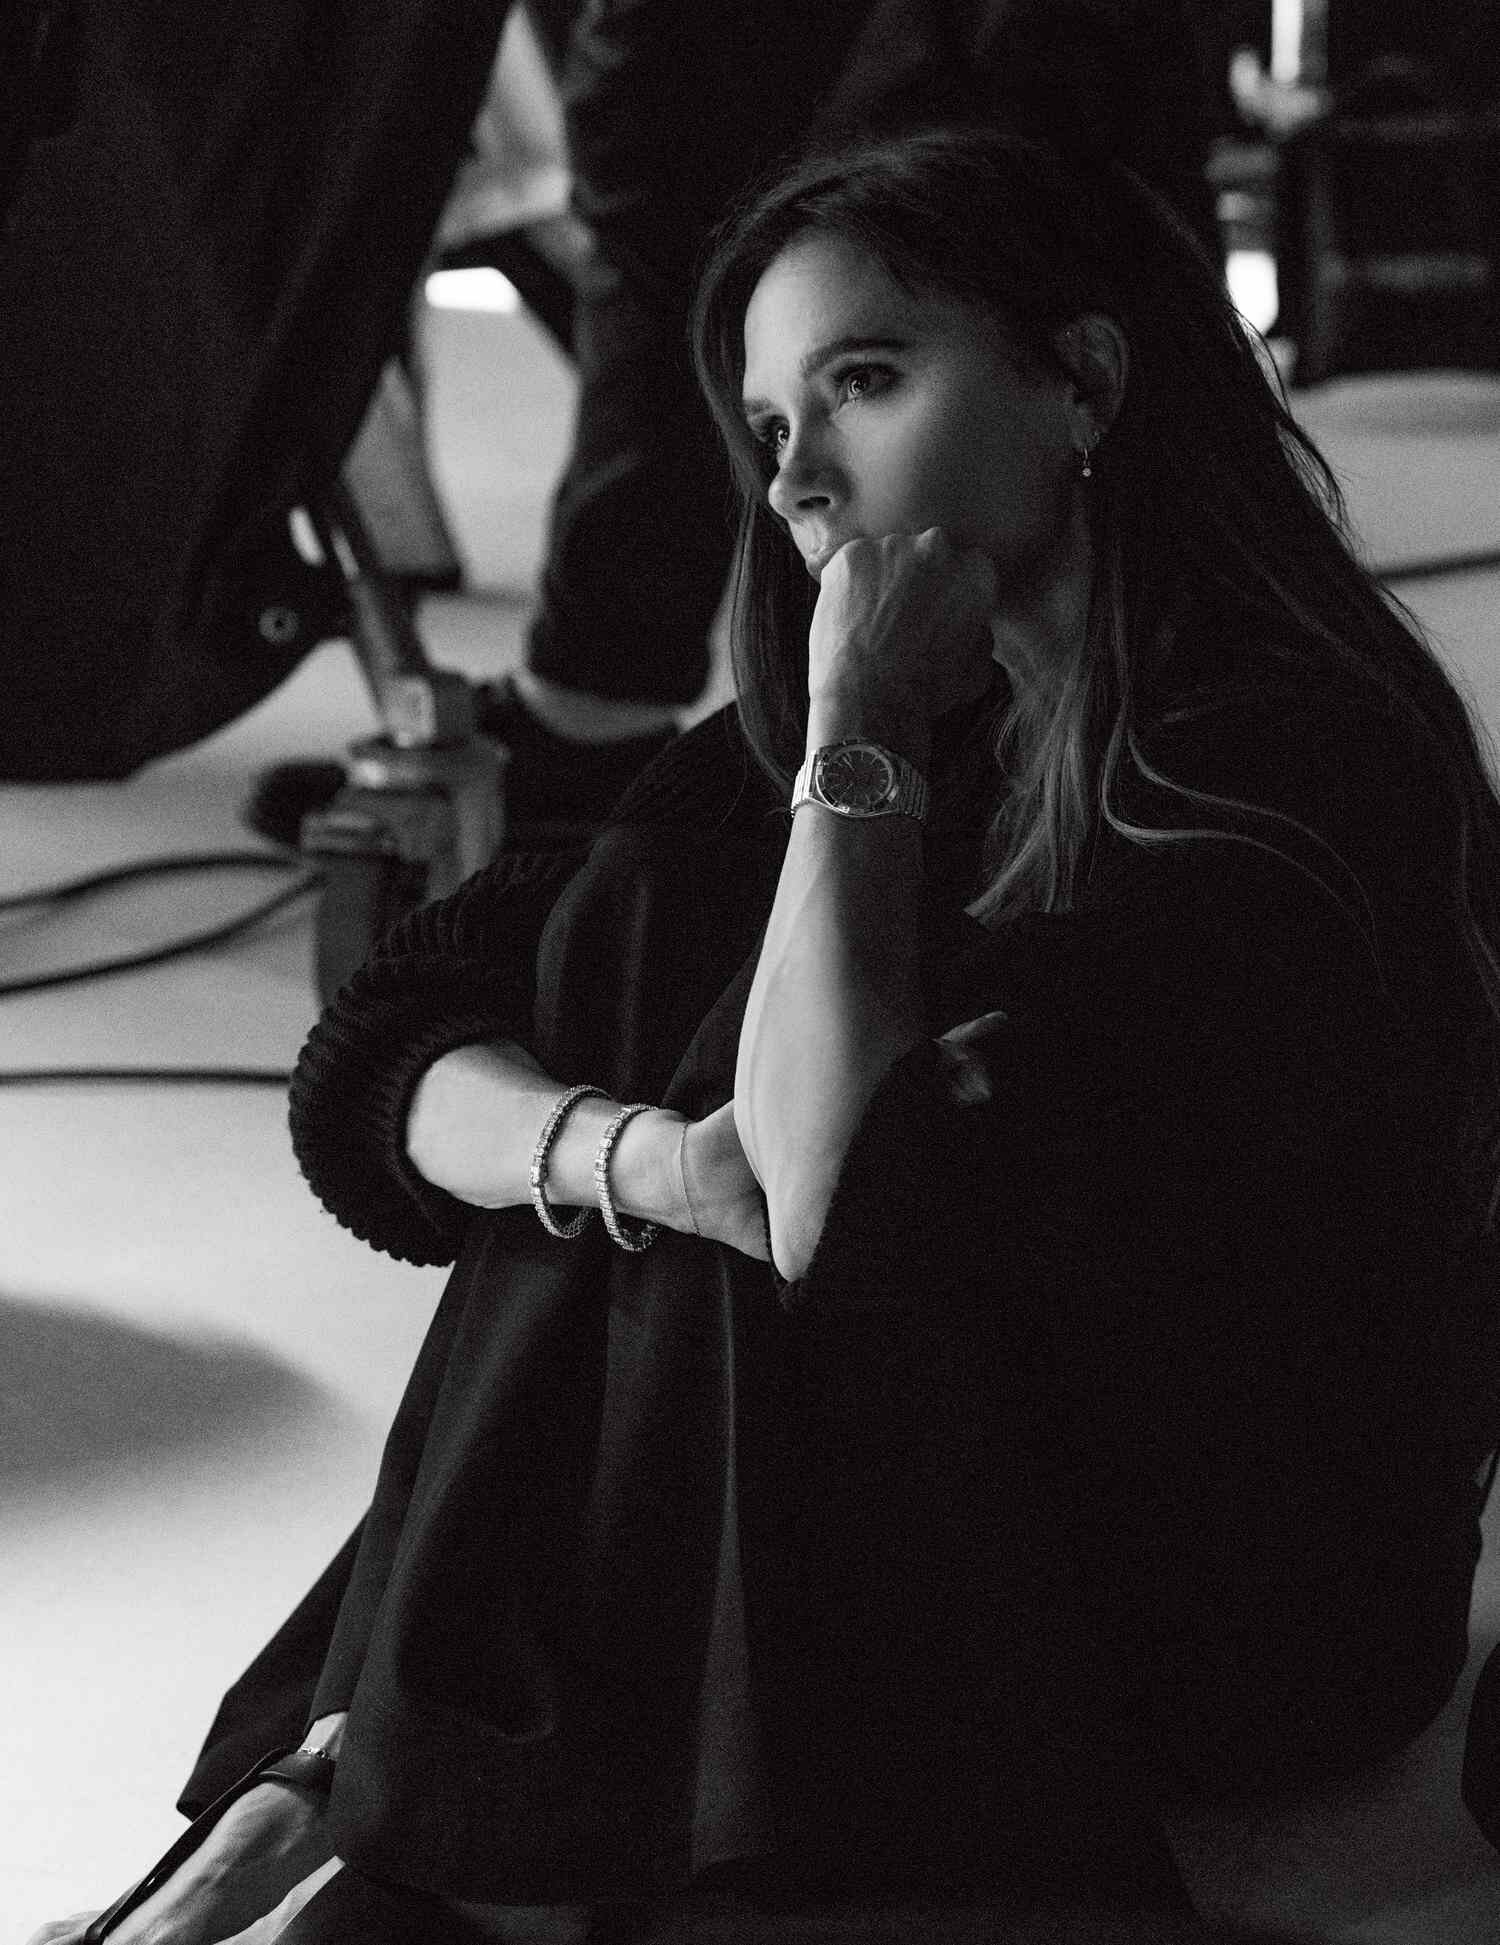 Victoria Beckham behind the scenes of the set of the Chronomat 36 Victoria Beckham collection photoshoot.